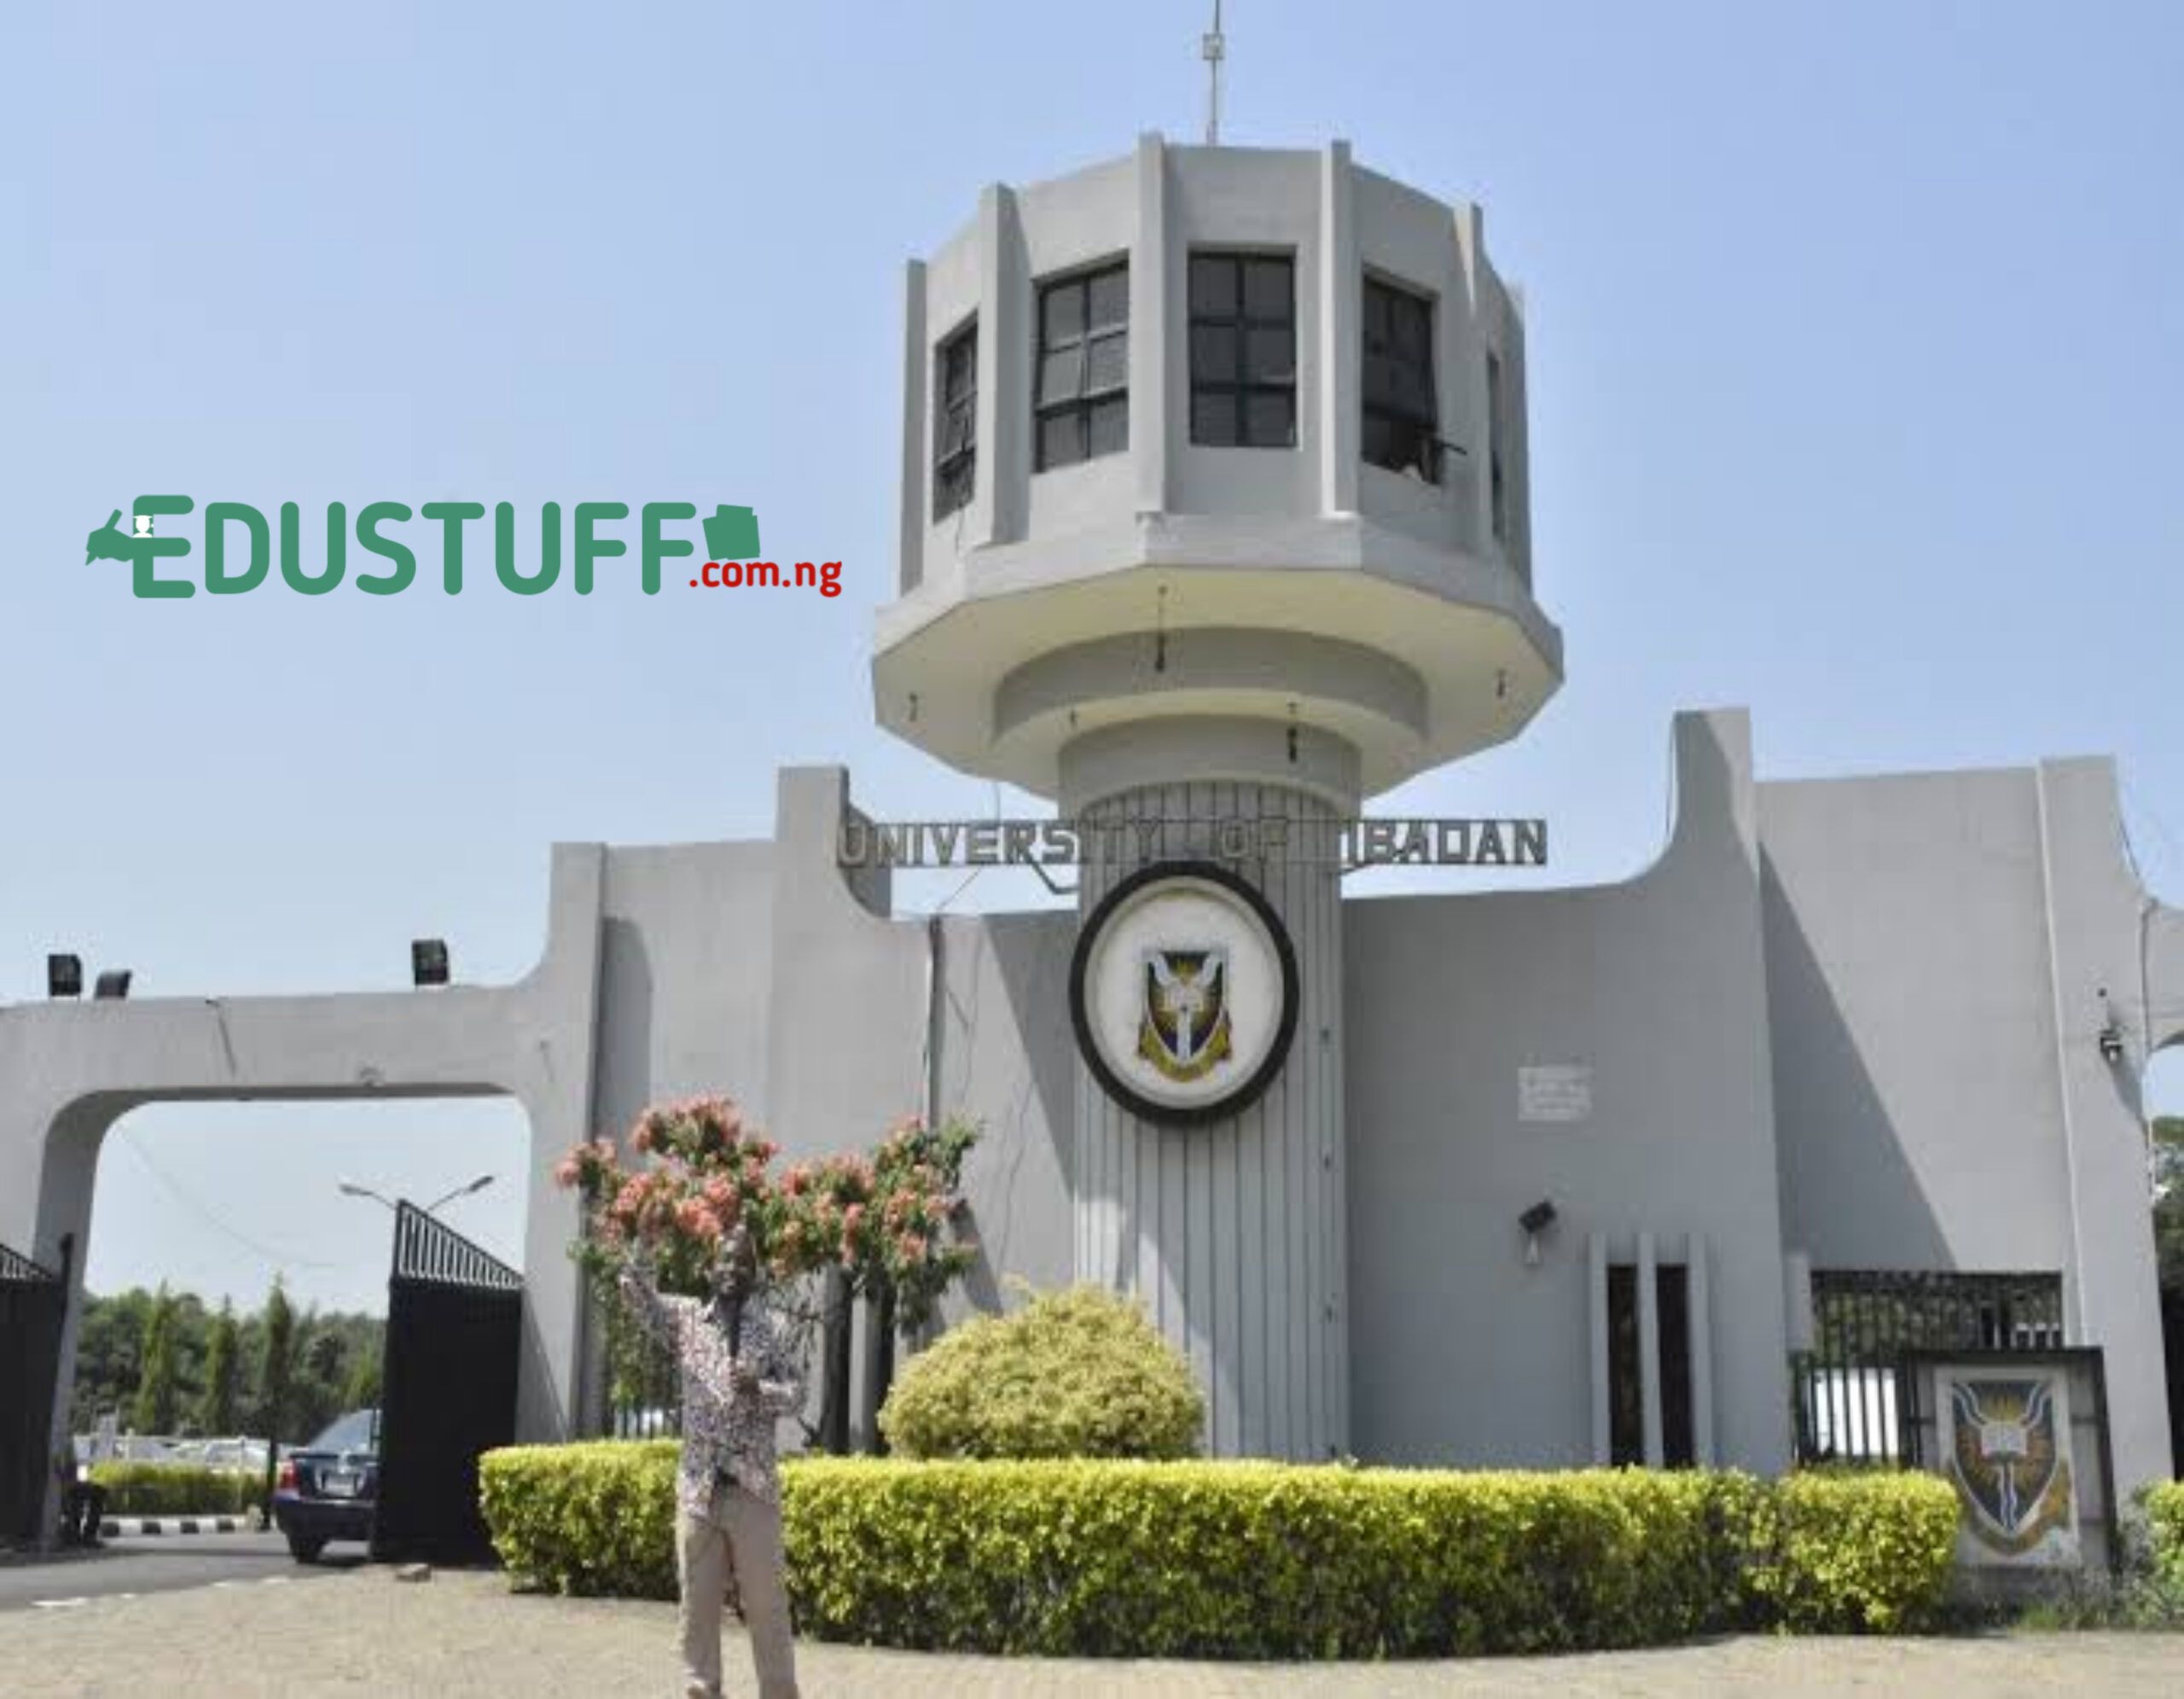 UI Post UTME Admission Screening Form for 2020/2021 is out